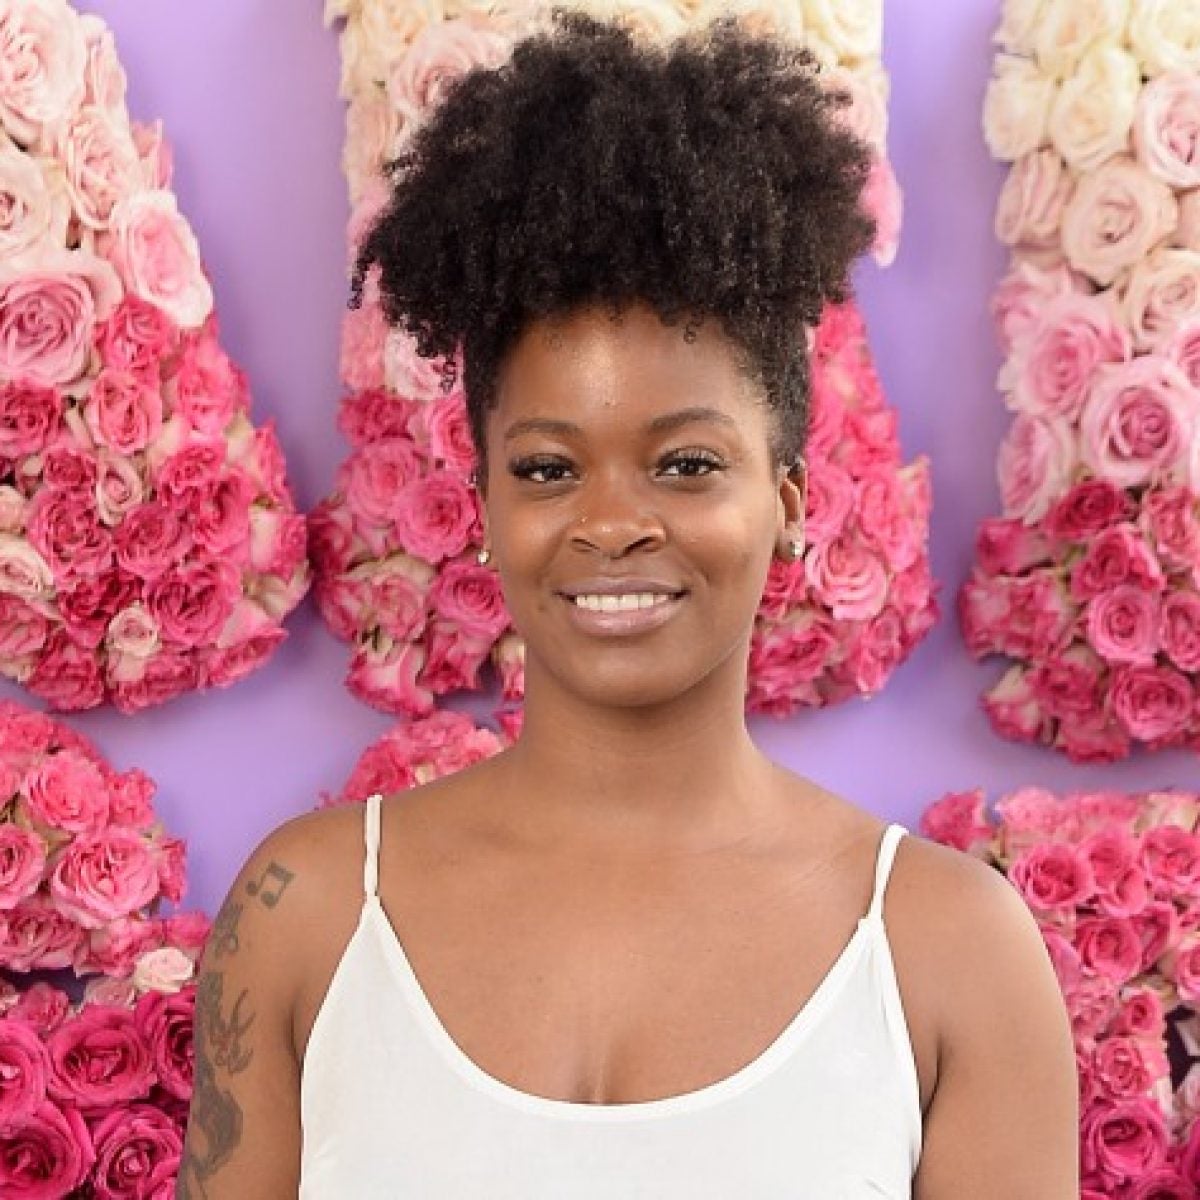 Fans Beg For An Ari Lennox Hair Care Line After She Posts A New Photo Of Her Curls